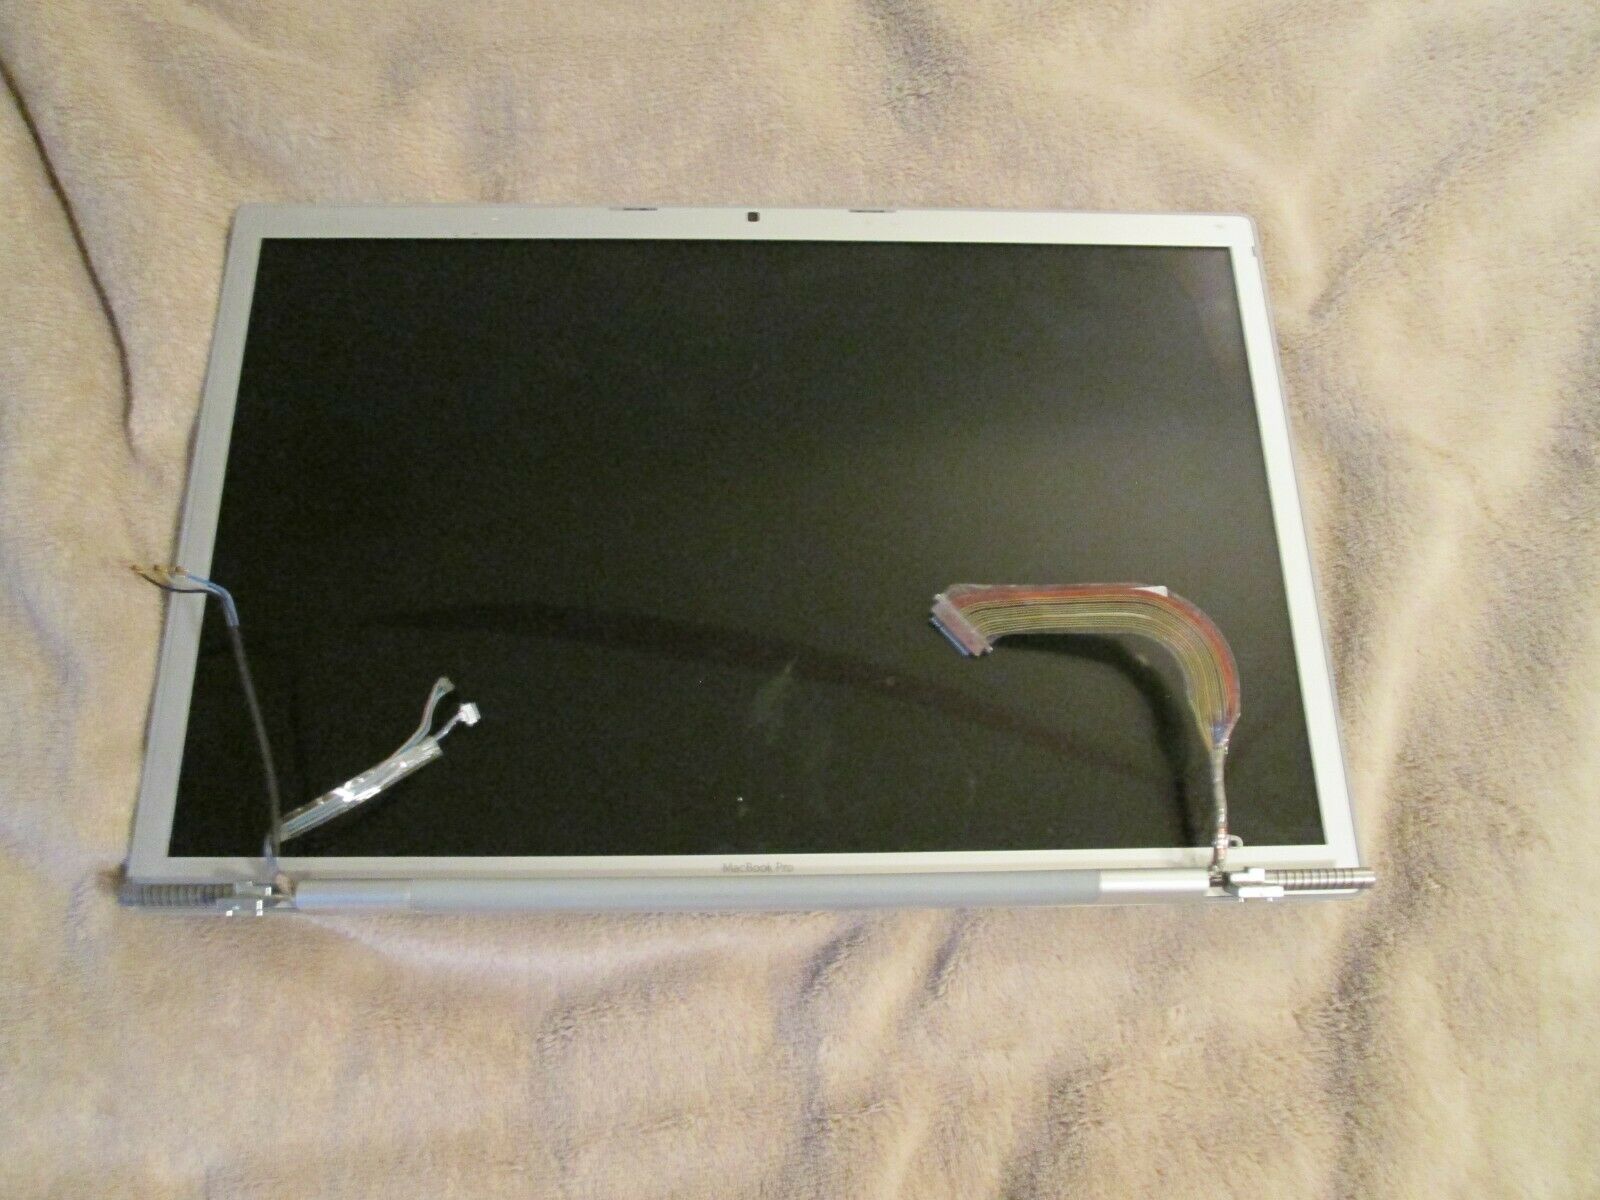 Apple MacBook Pro A1212 17" Complete LCD Screen Assembly Cracked Screen As Is - $29.99